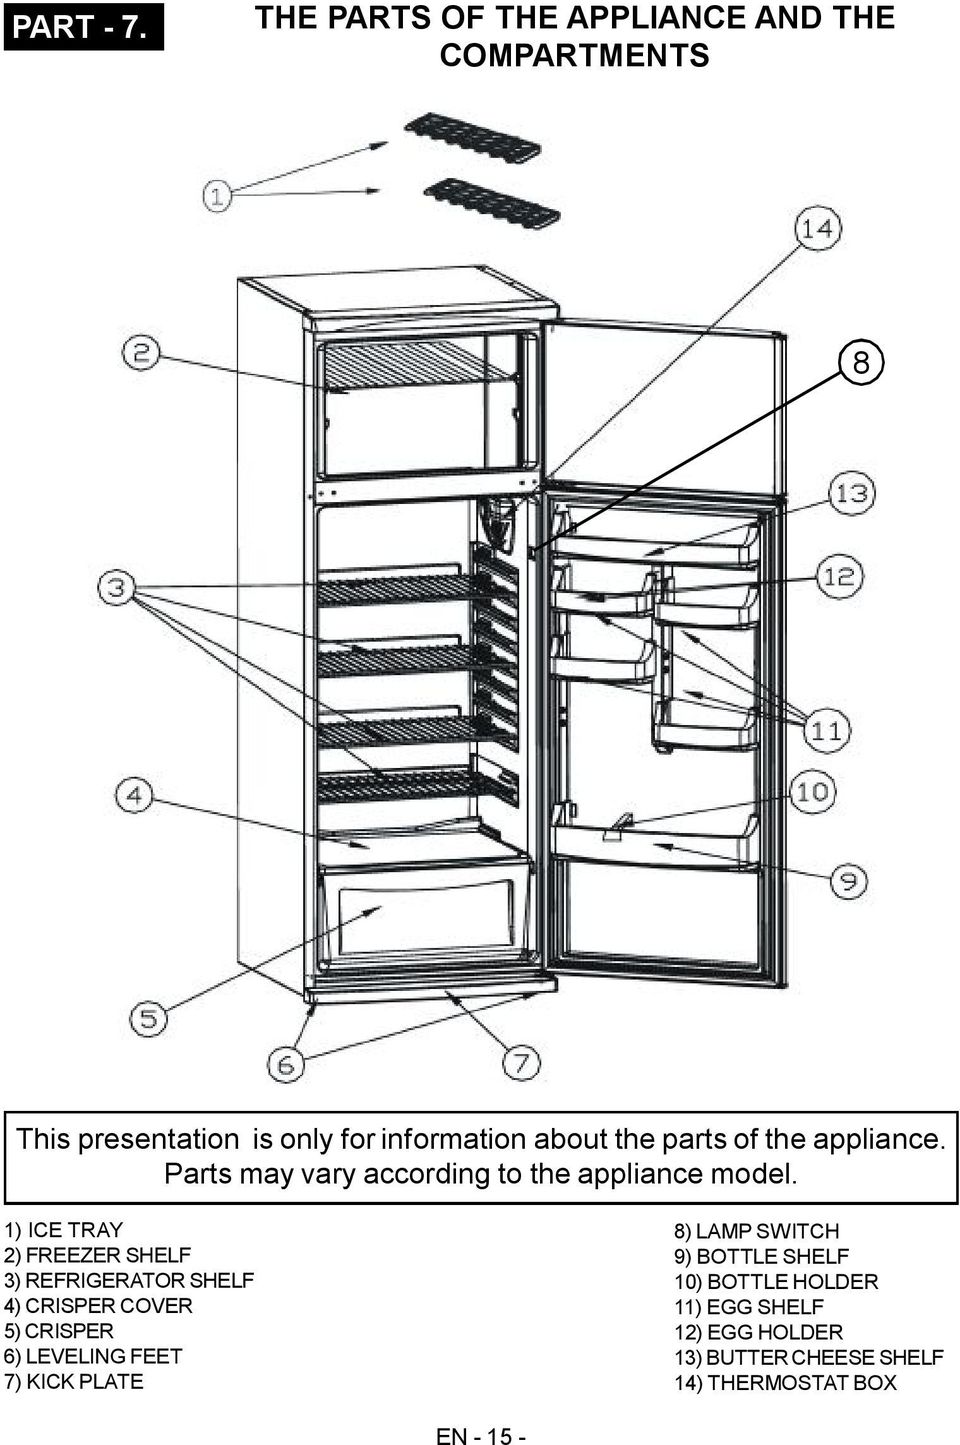 parts of the appliance. Parts may vary according to the appliance model.